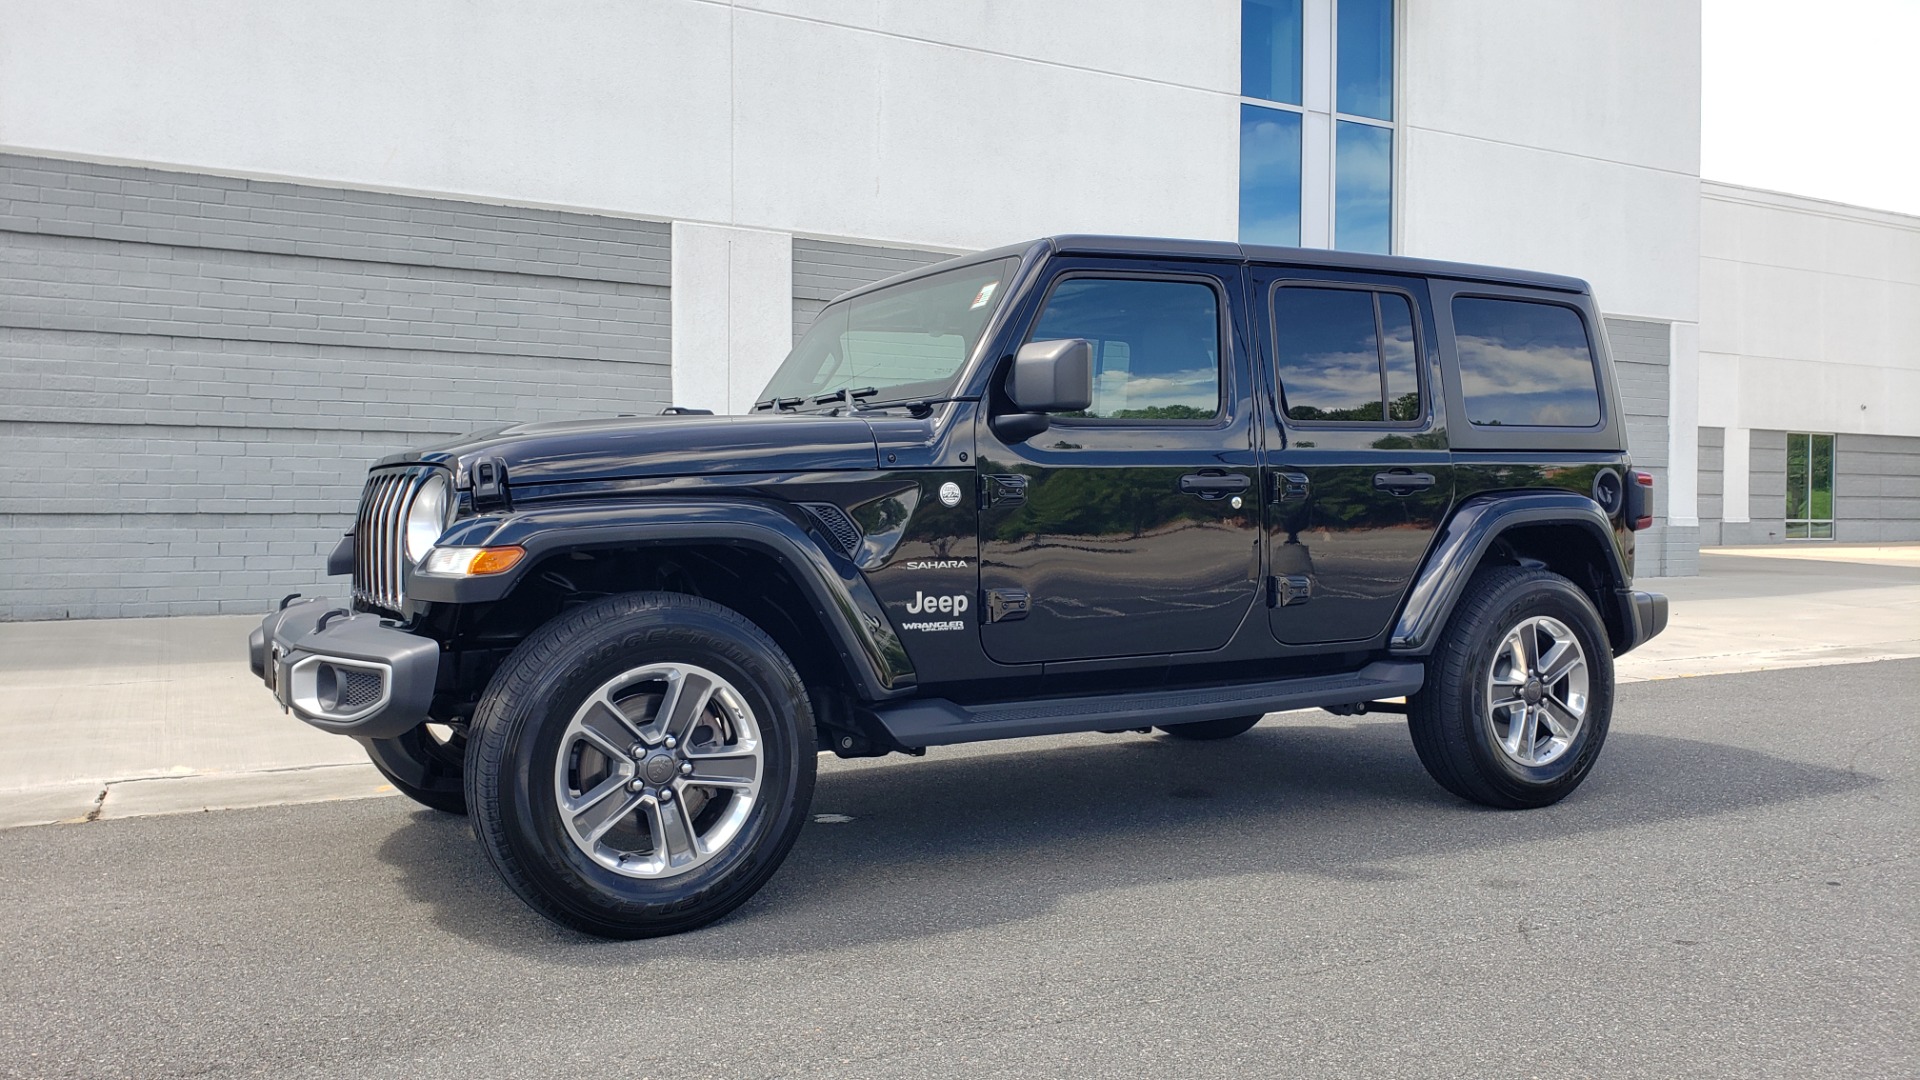 Used 2018 Jeep WRANGLER UNLIMITED SAHARA / 3.6L V6 / 6-SPD MAN / ALPINE / NAV / HTD STS / REARVIEW for sale Sold at Formula Imports in Charlotte NC 28227 4